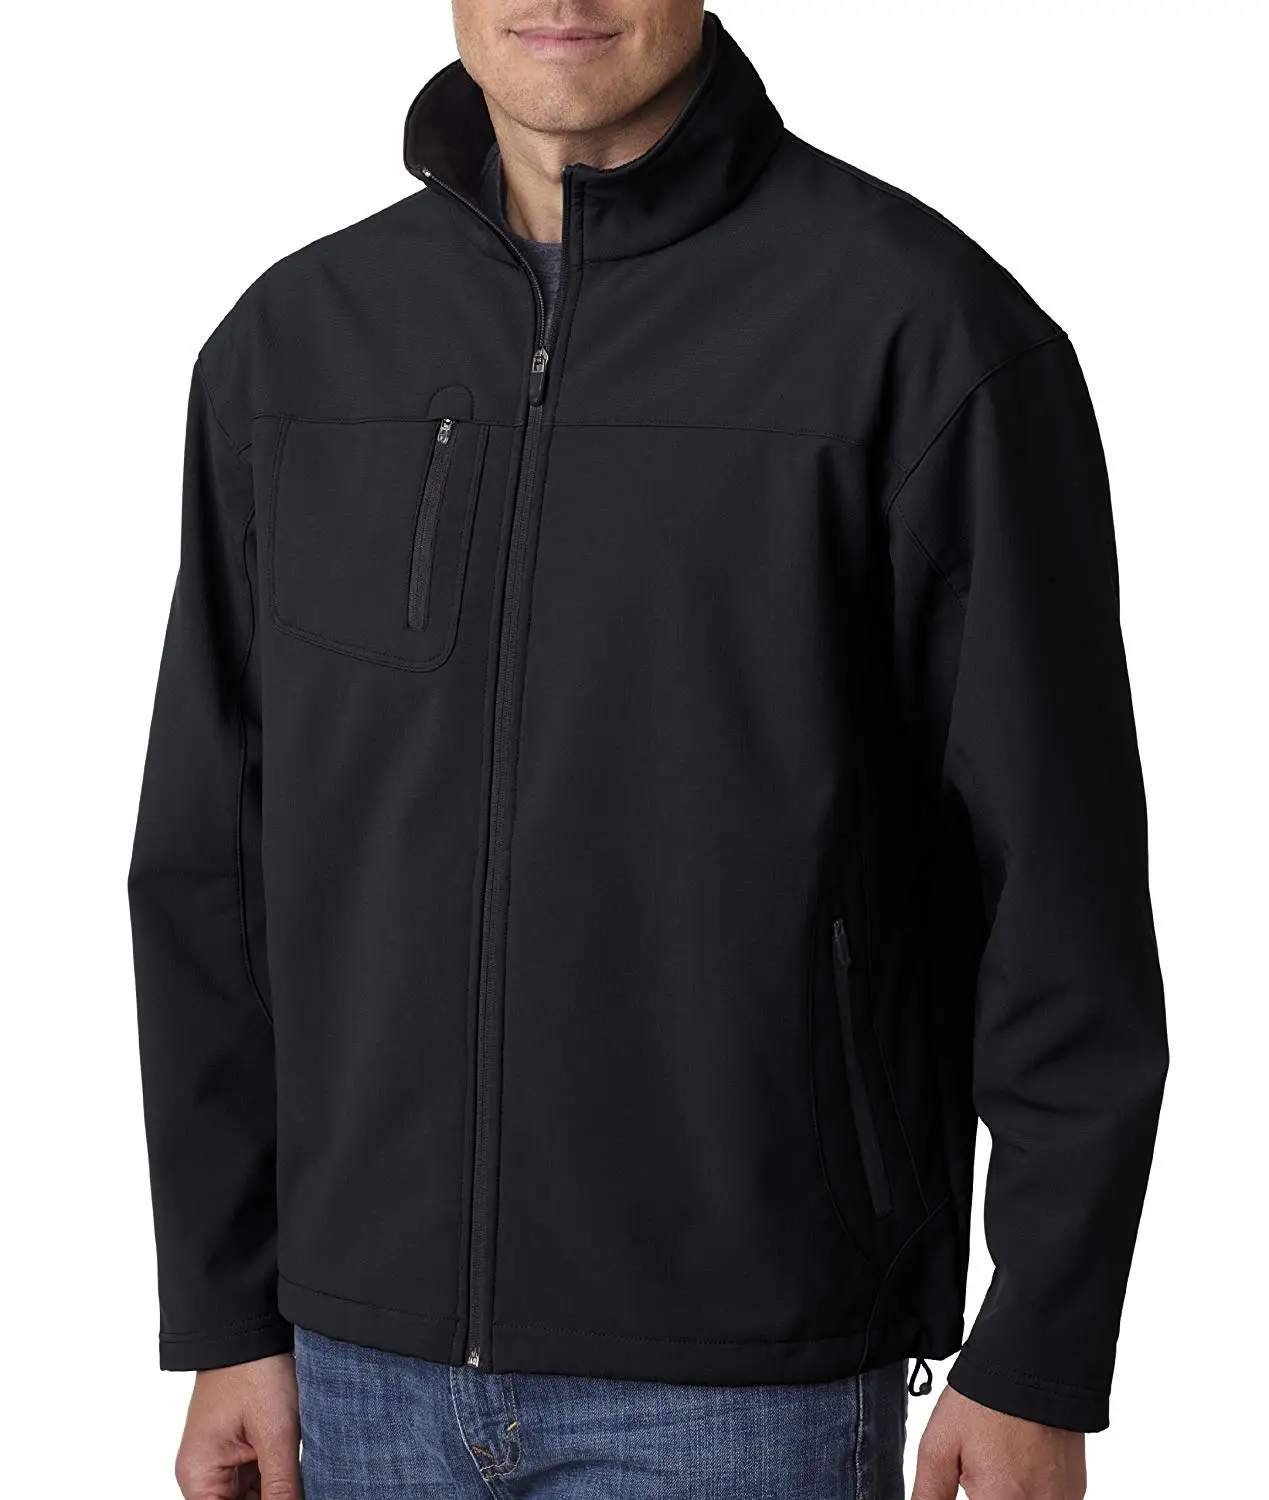 Cheap Rip Jacket, find Rip Jacket deals on line at Alibaba.com